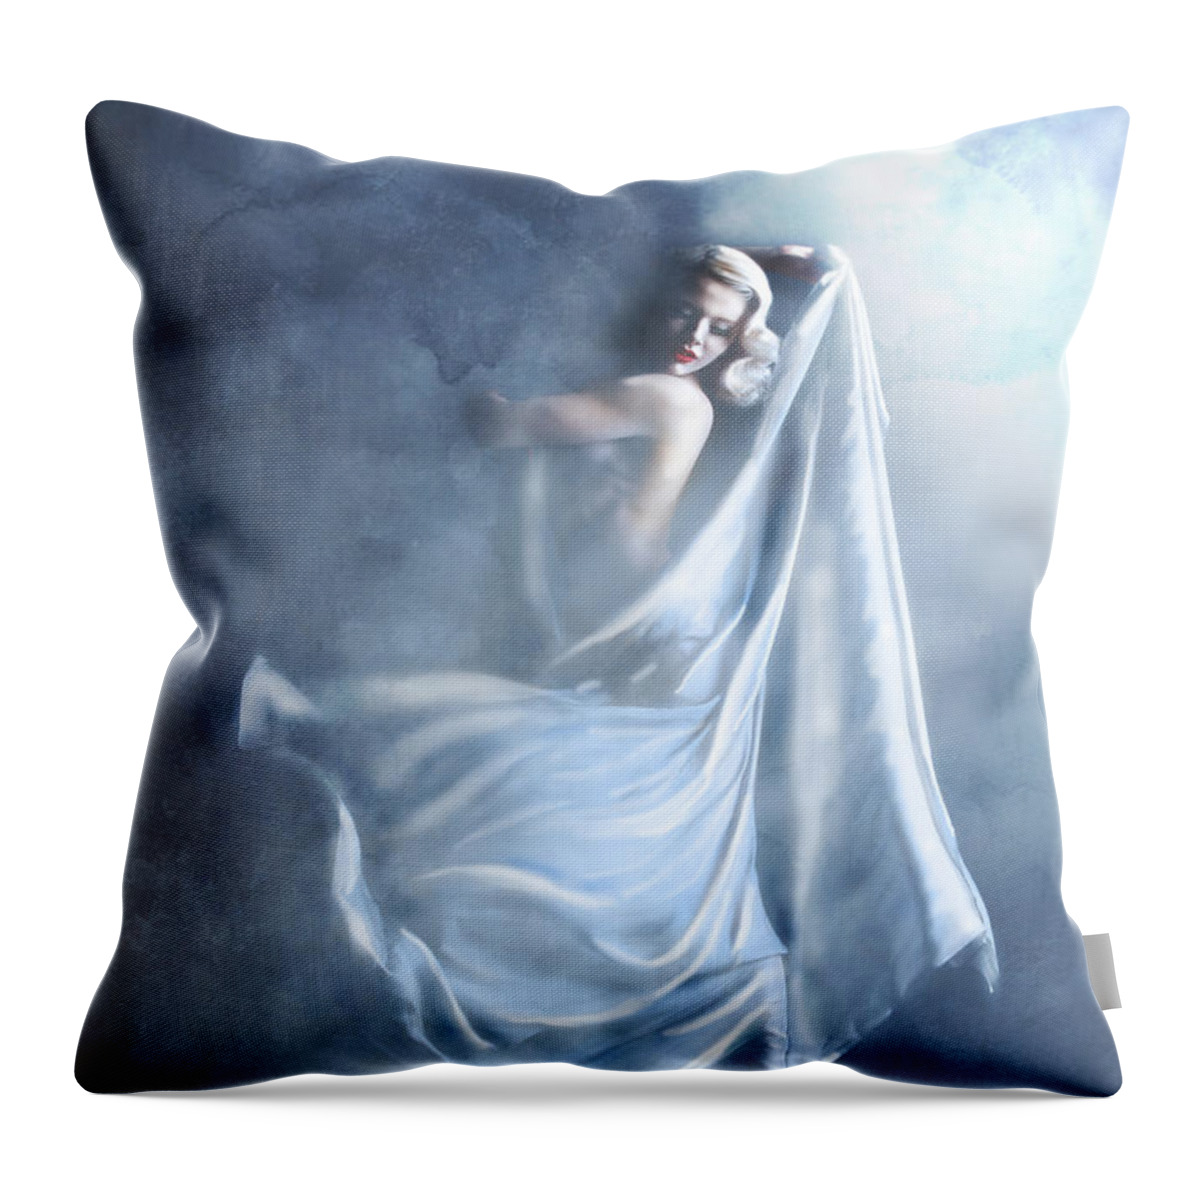 Dance Throw Pillow featuring the digital art That single fleeting moment when you feel alive by Linda Lees